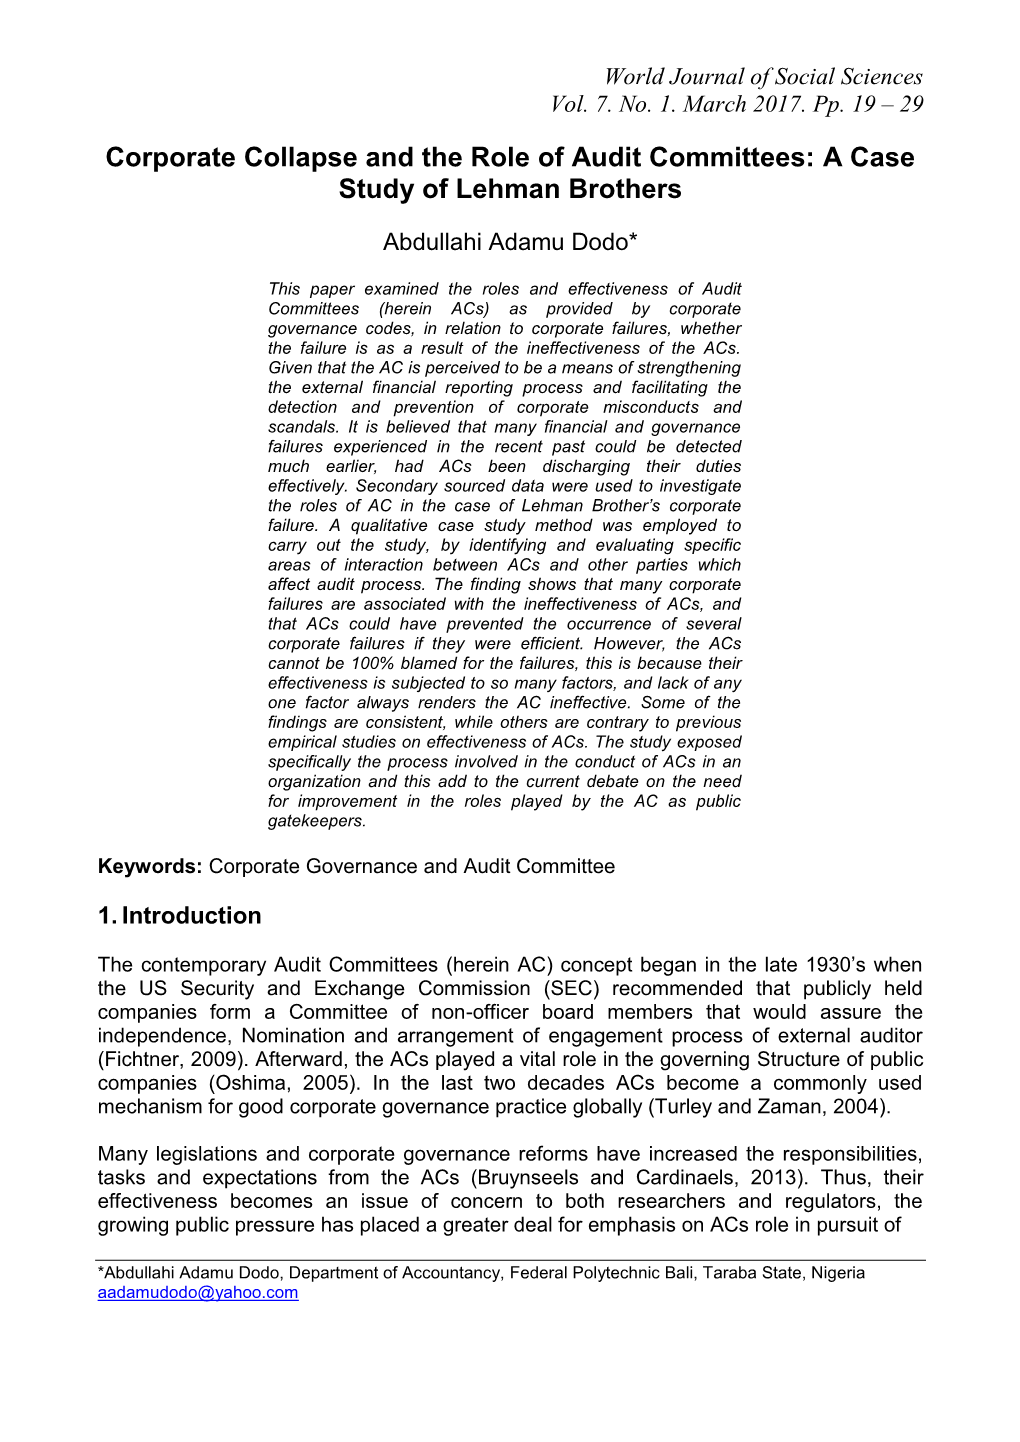 Corporate Collapse and the Role of Audit Committees: a Case Study of Lehman Brothers